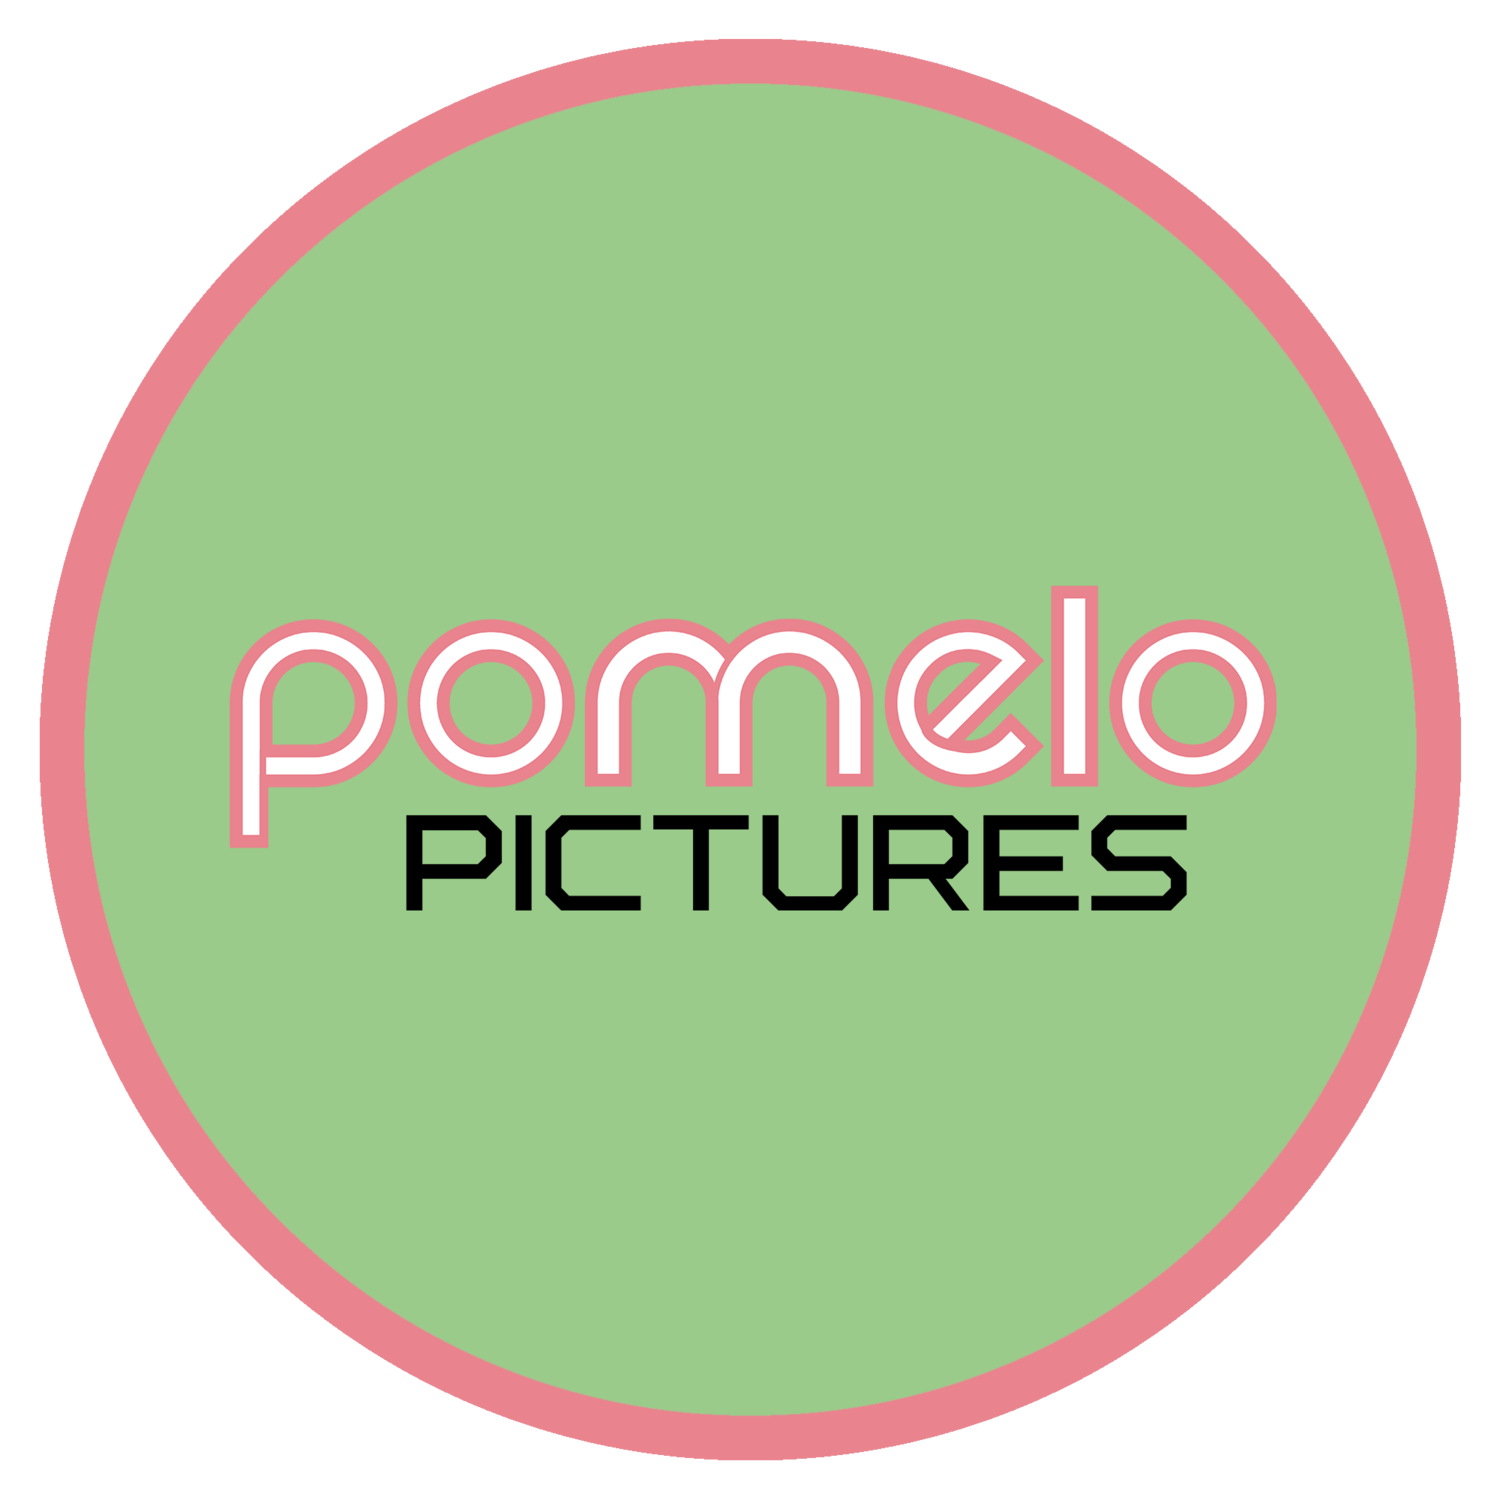 Pomelo Pictures